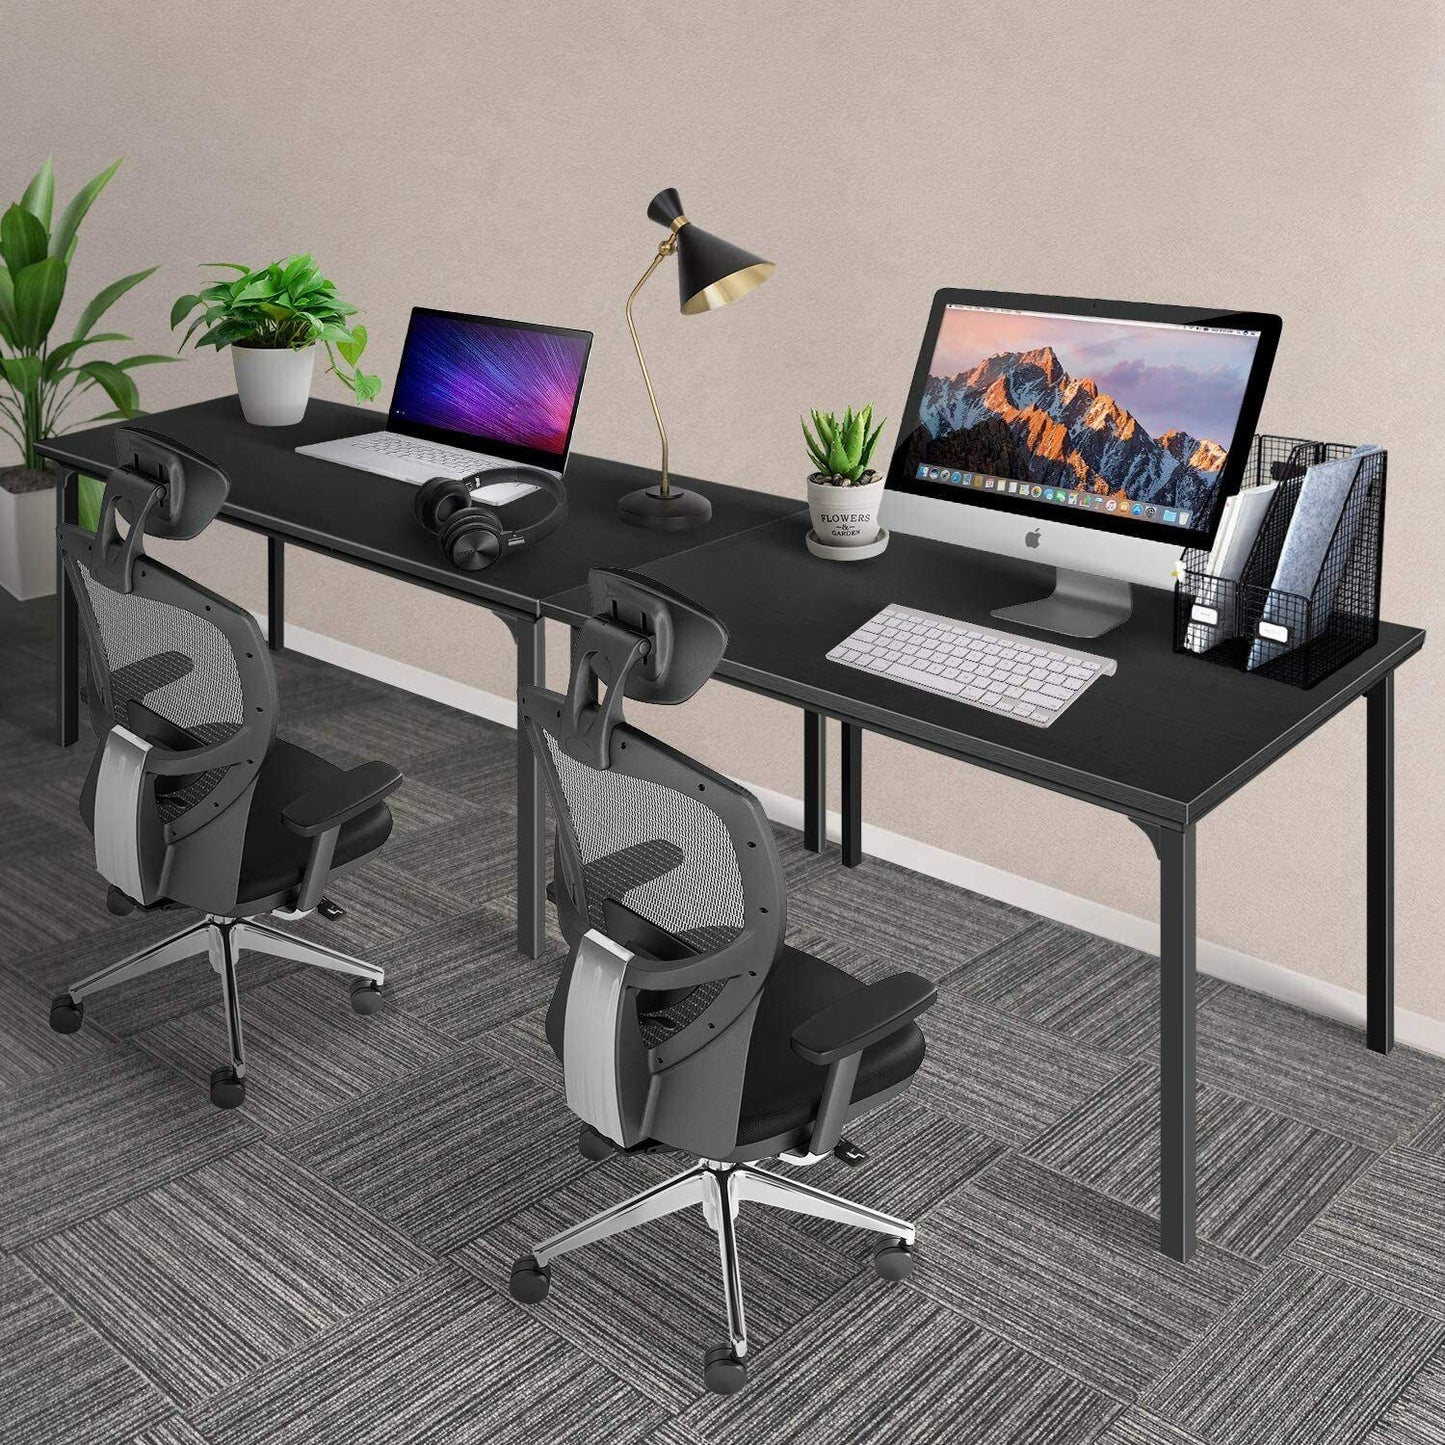 Deluxe Modern Style Home Office Computer Desk for Working and Studying